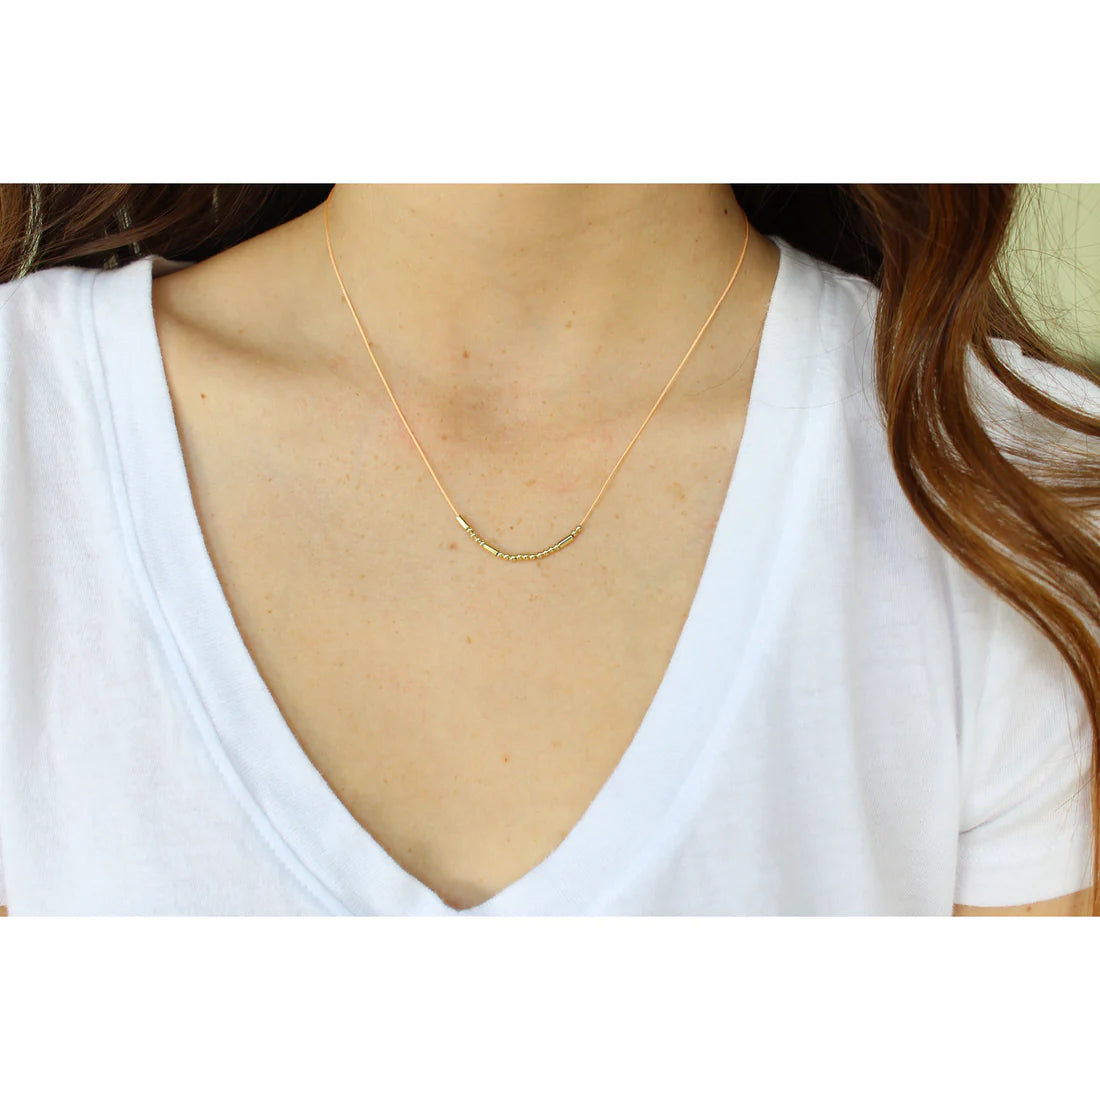 BLESSED Morse Code Necklace